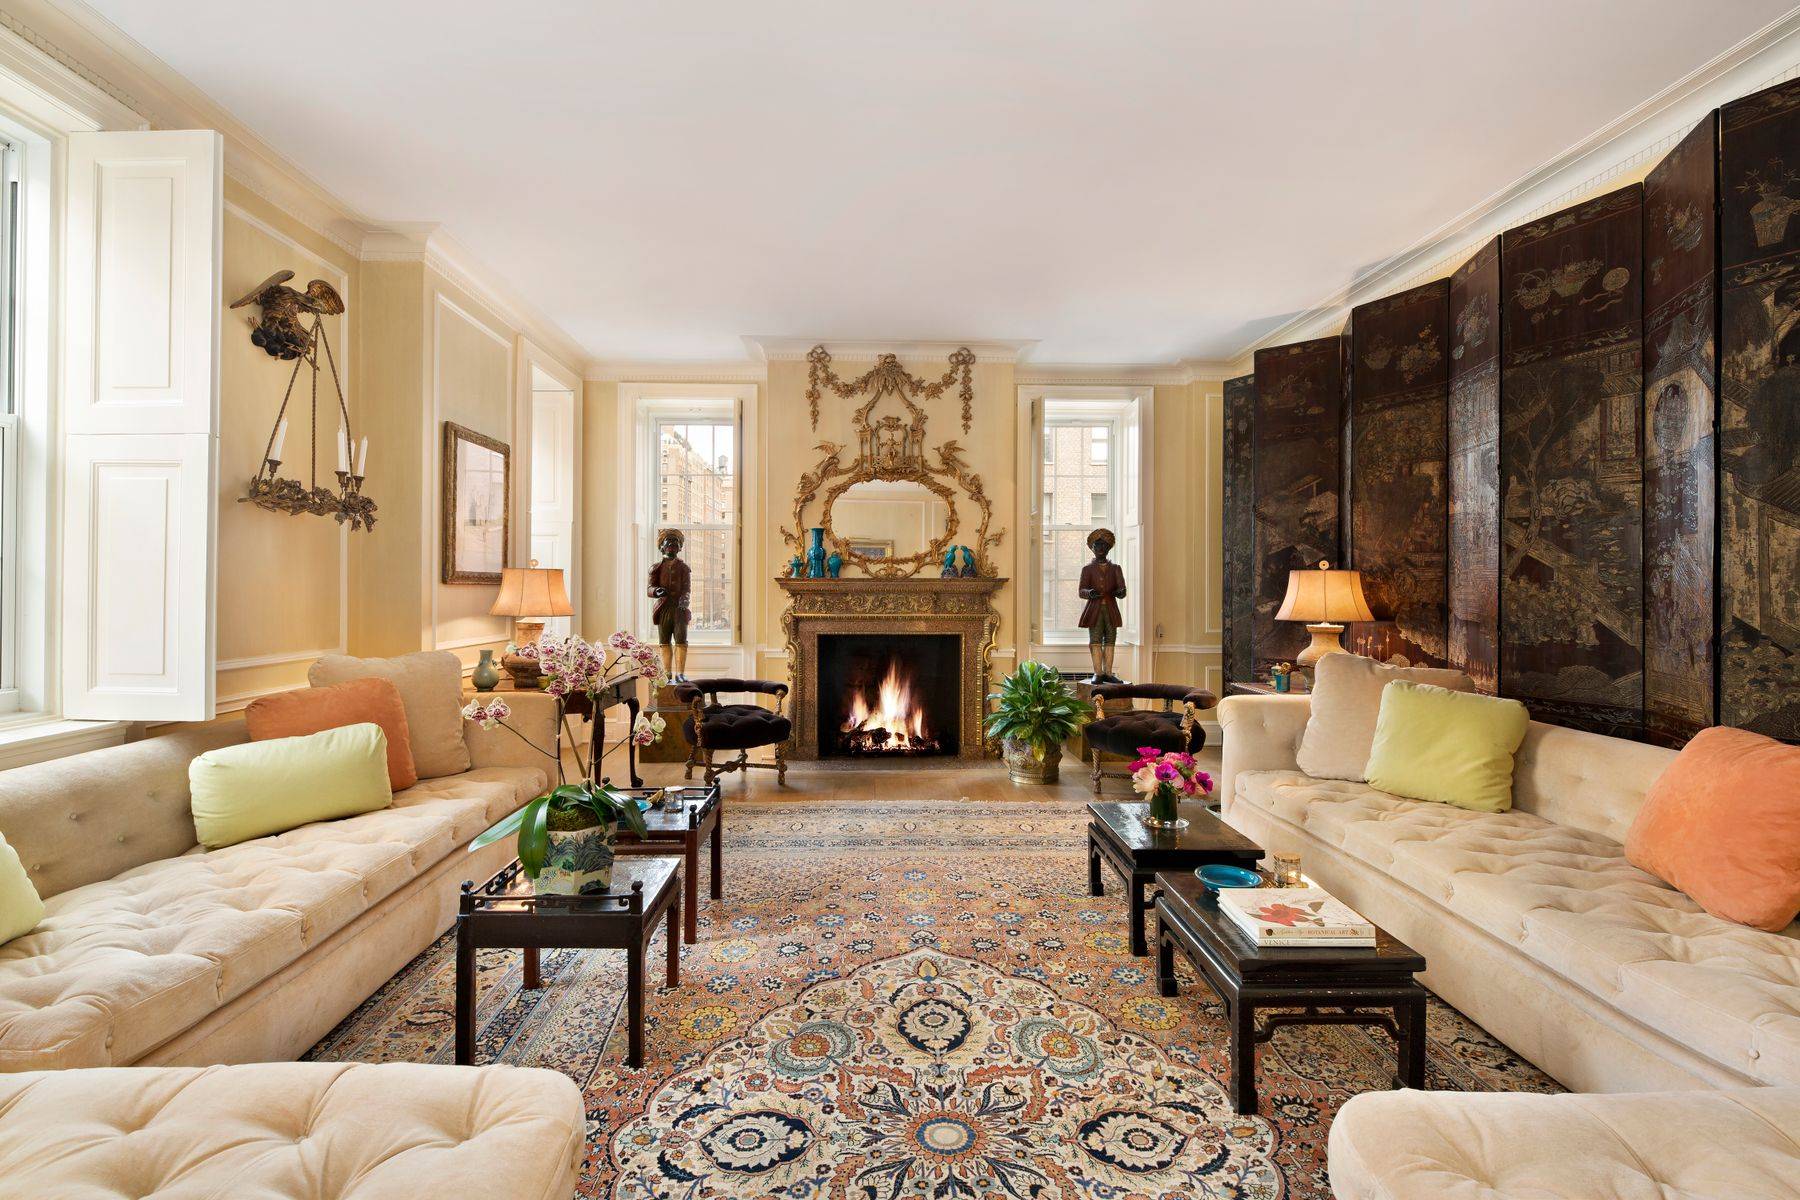 This marvelous sun filled and extremely elegant corner duplex is the epitome of Upper East Side chic.